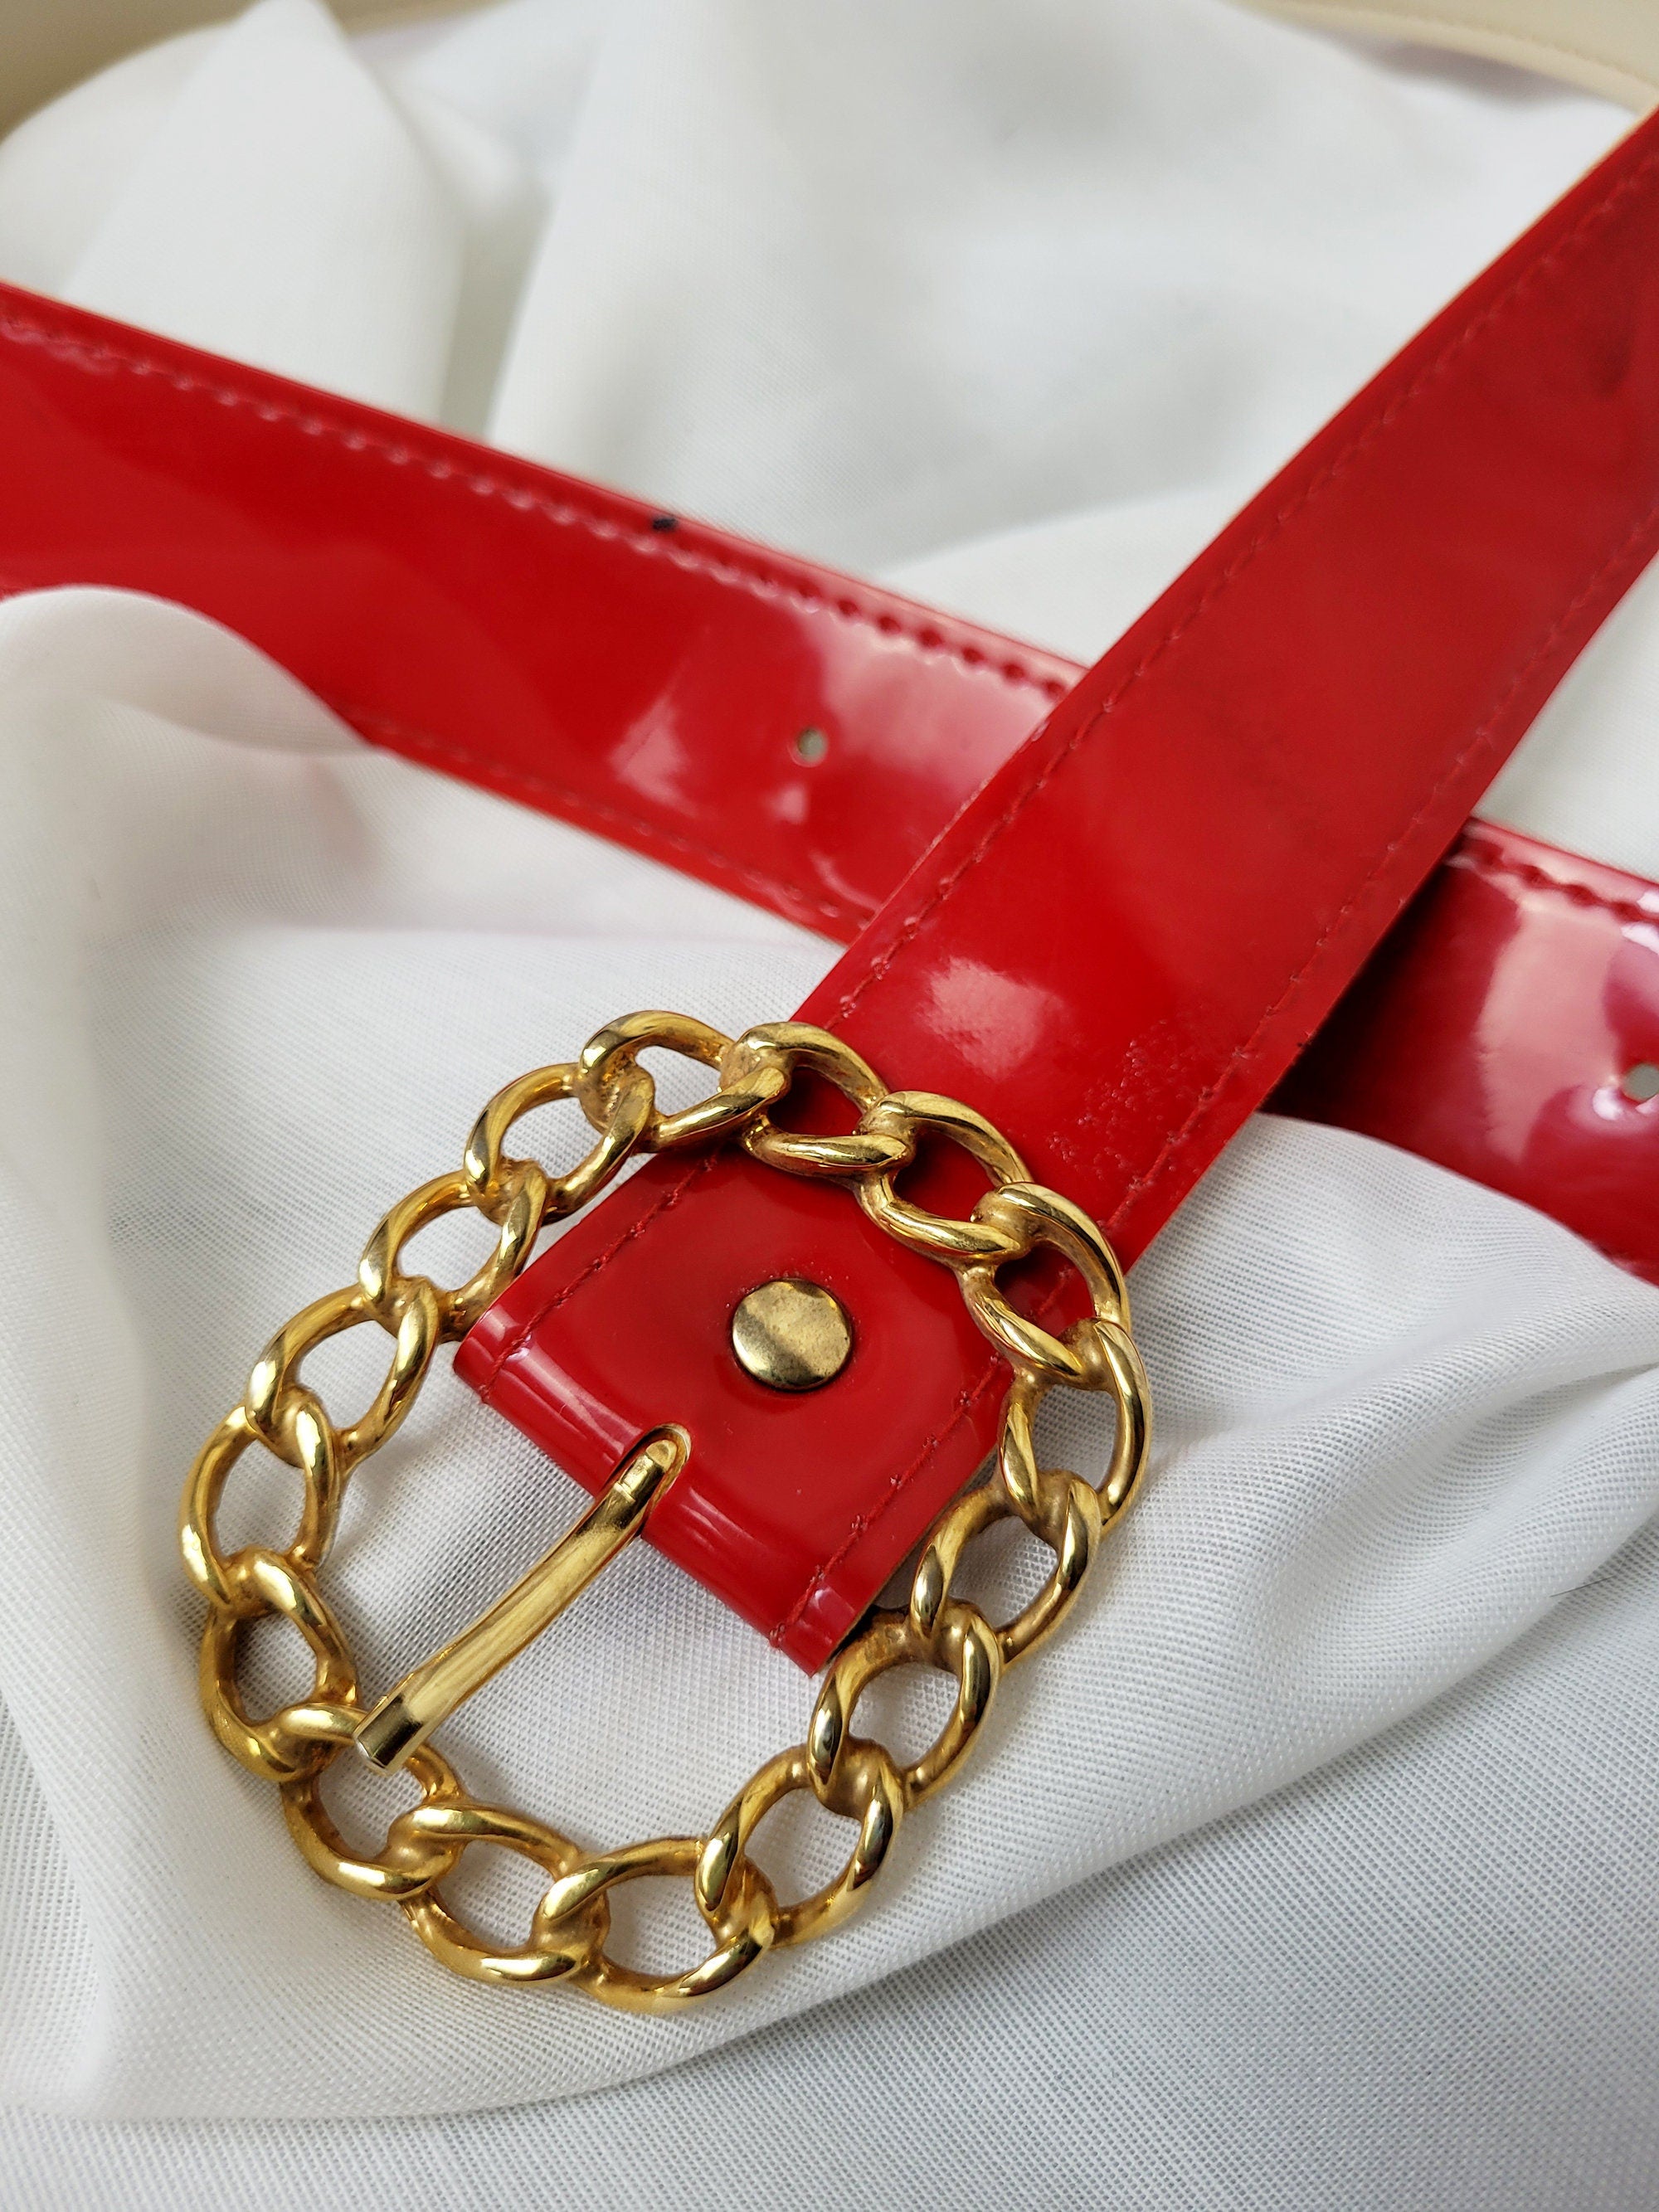 Vintage 90s faux leather red glossy minimalist belt